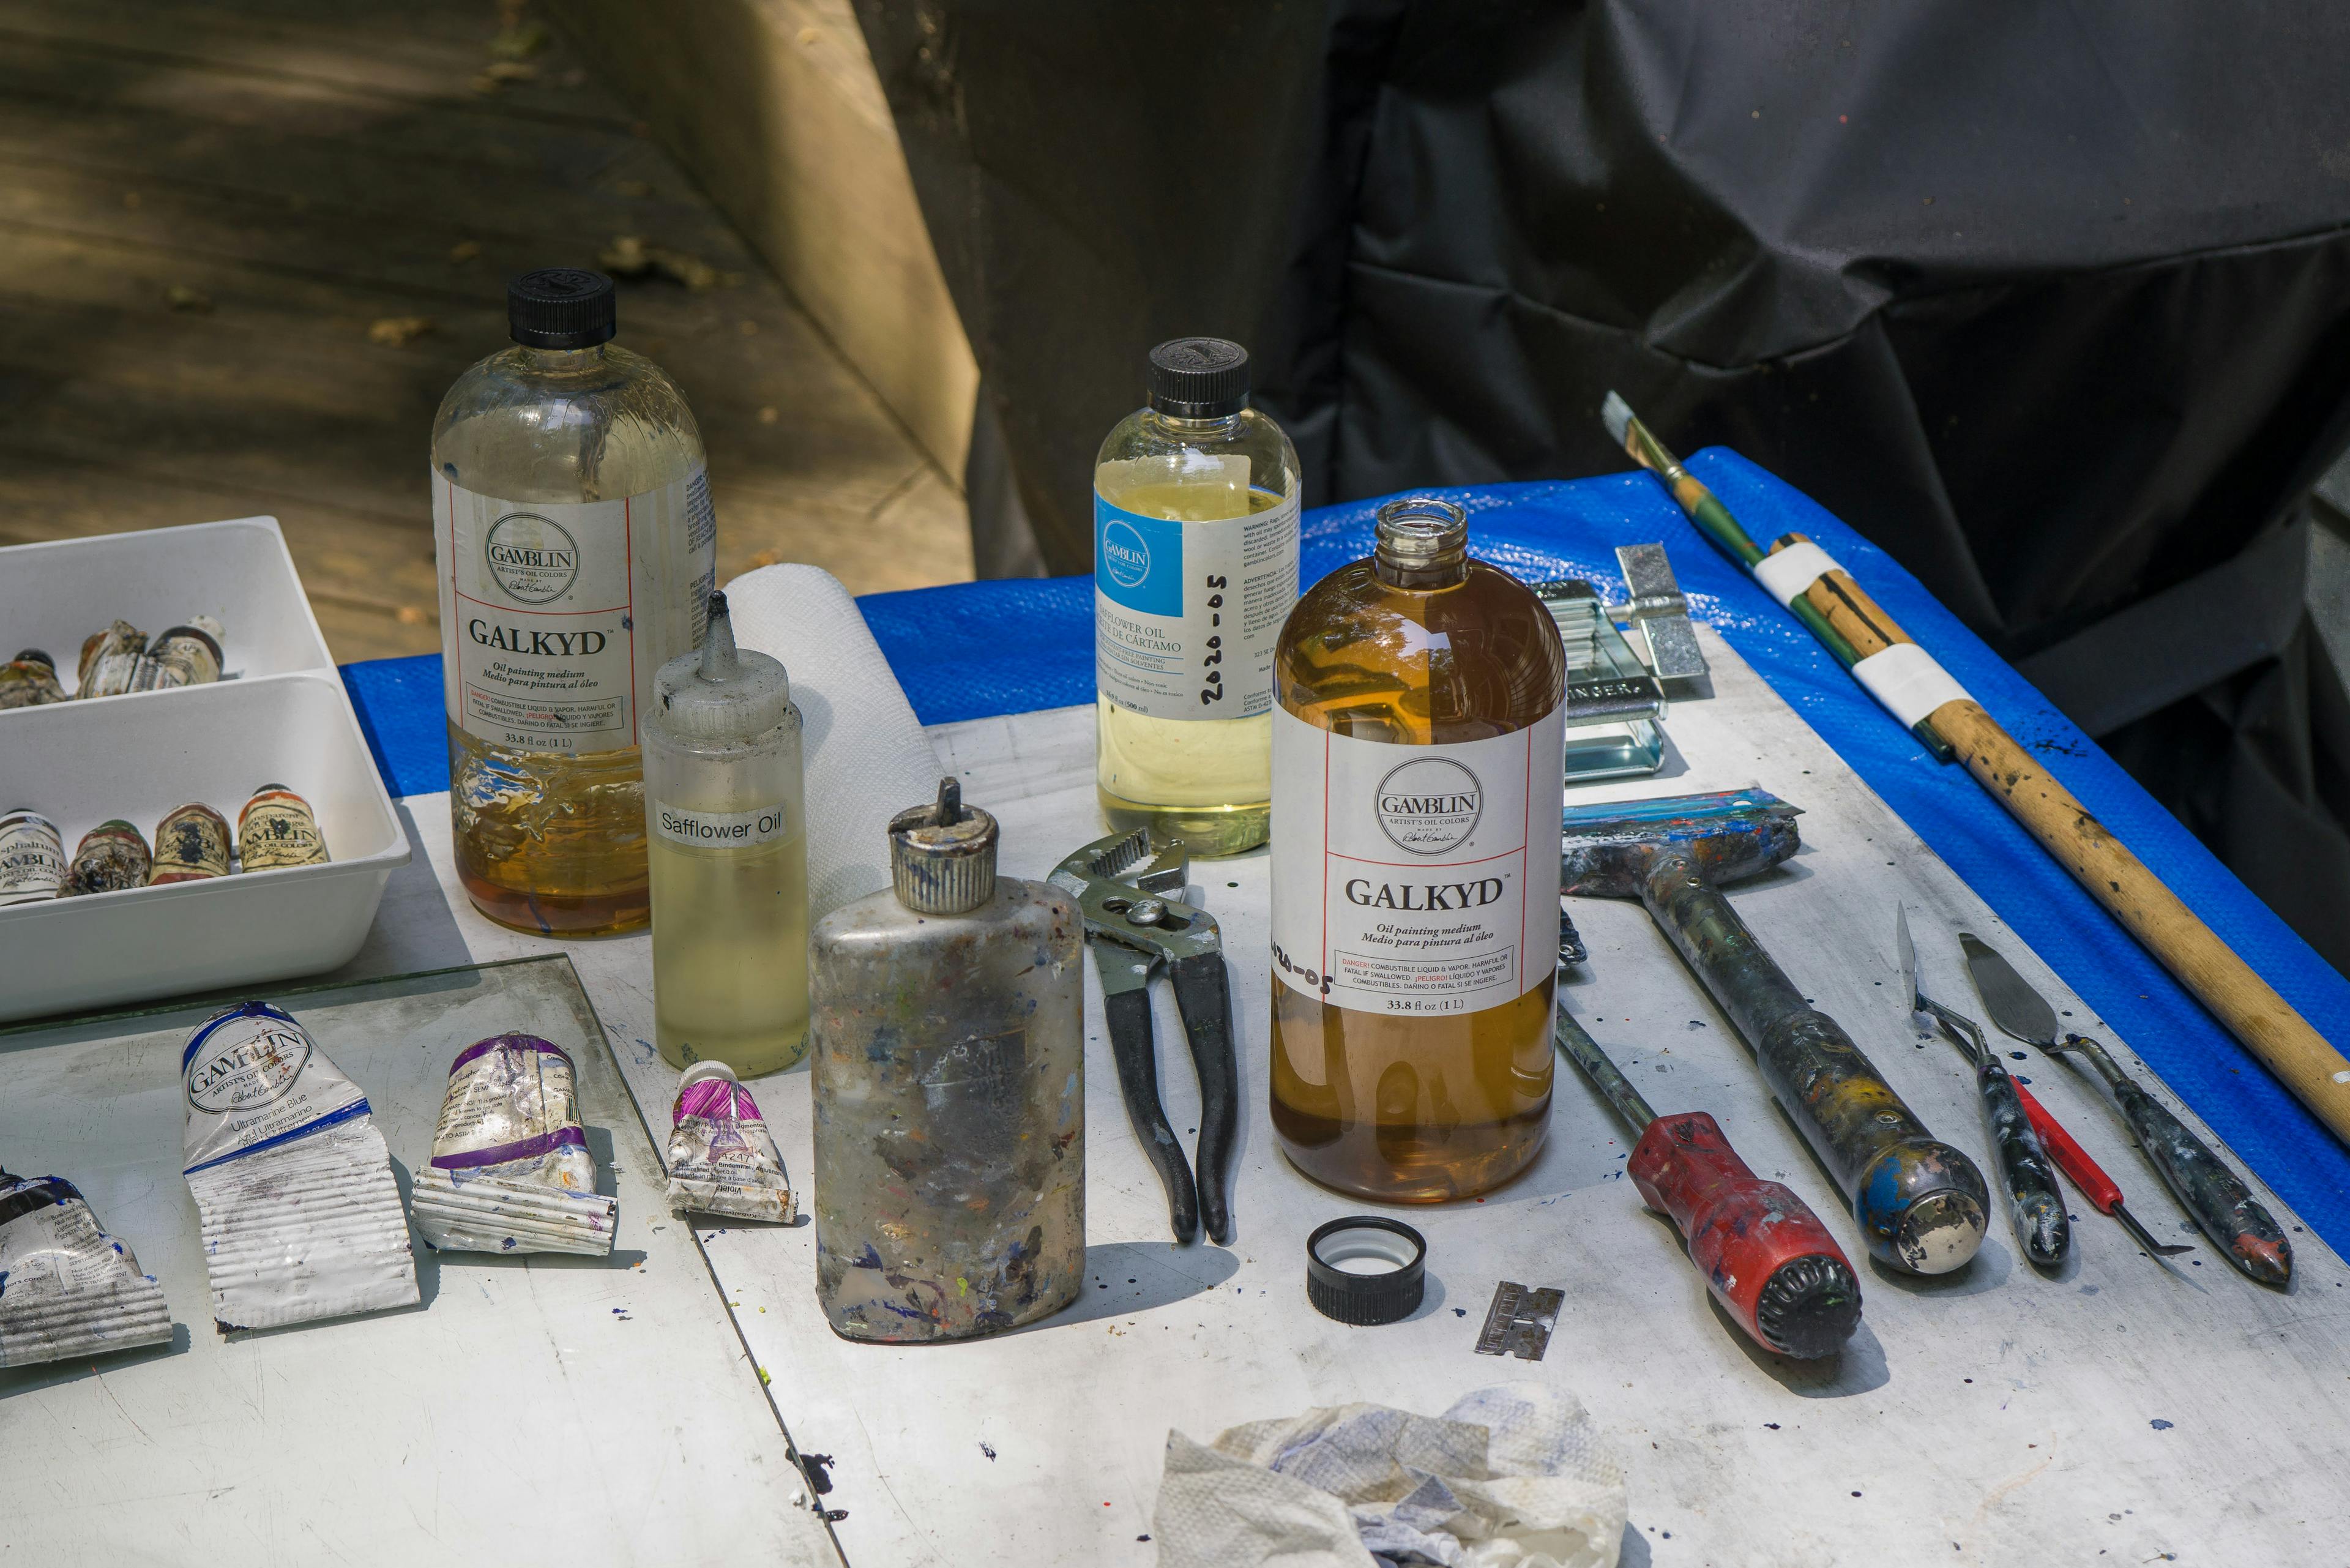 Christopher's painting tools on a glass palette outside